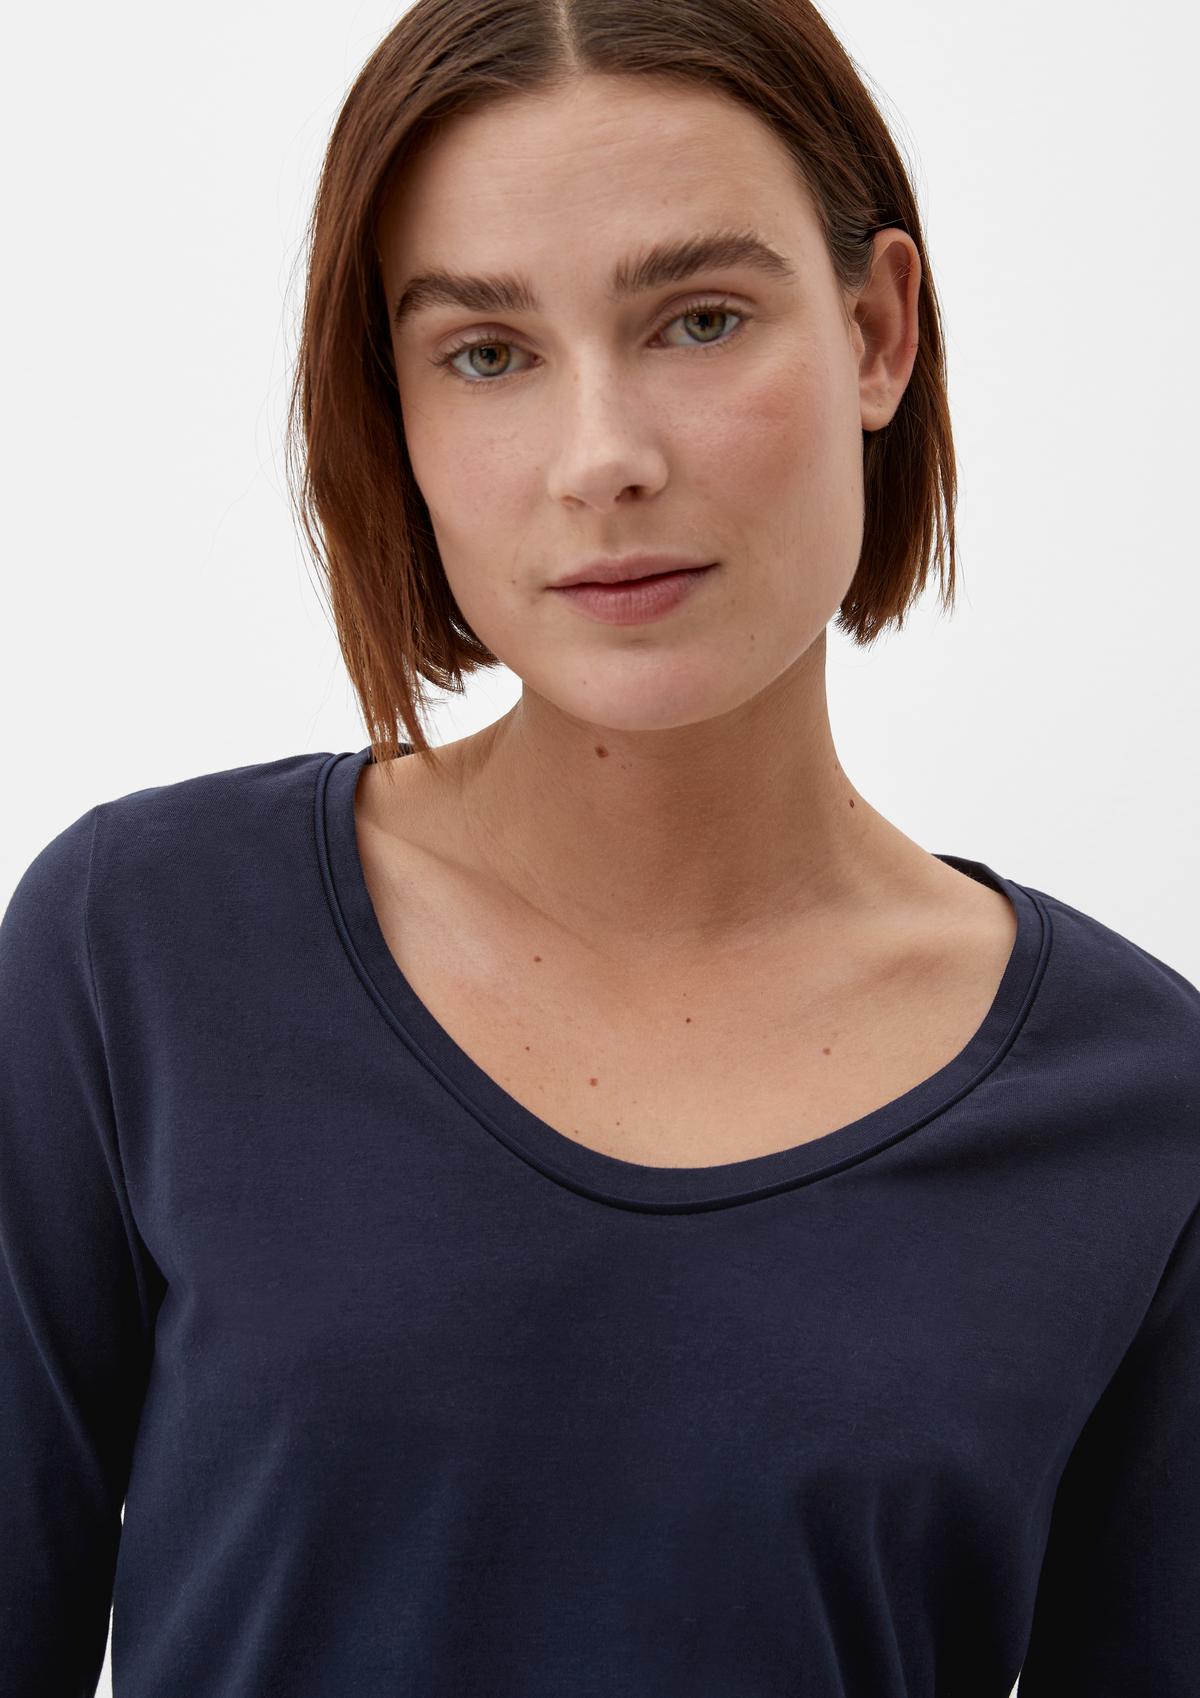 s.Oliver Long sleeve top with a bateau neckline